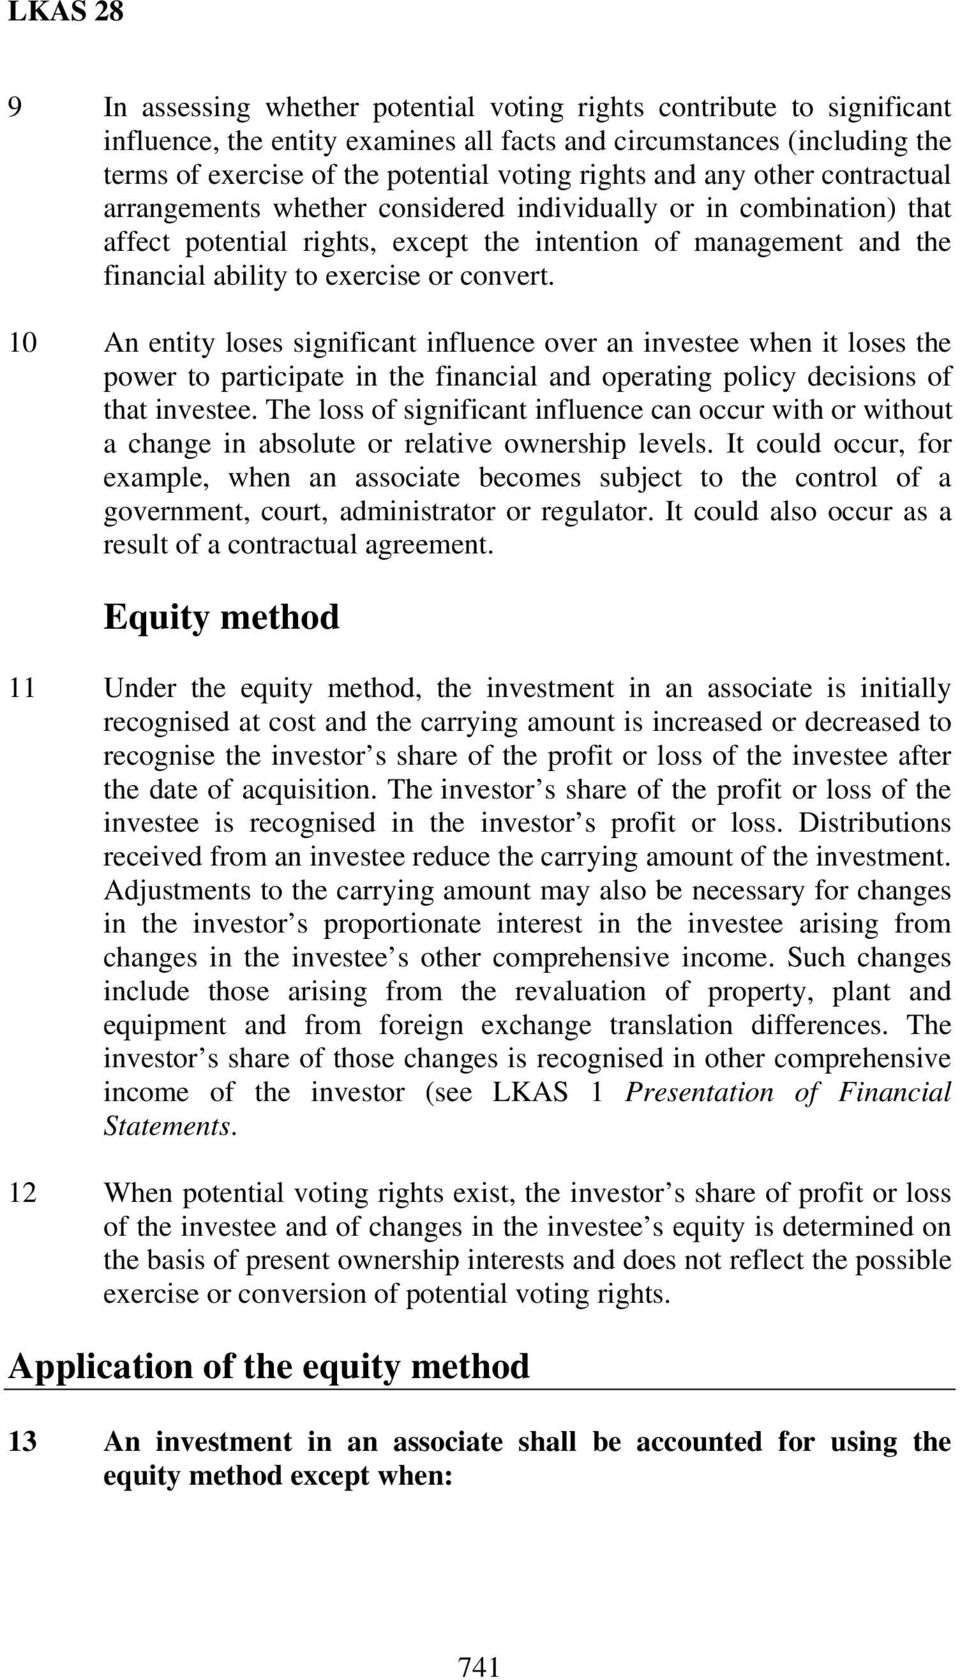 10 An entity loses significant influence over an investee when it loses the power to participate in the financial and operating policy decisions of that investee.